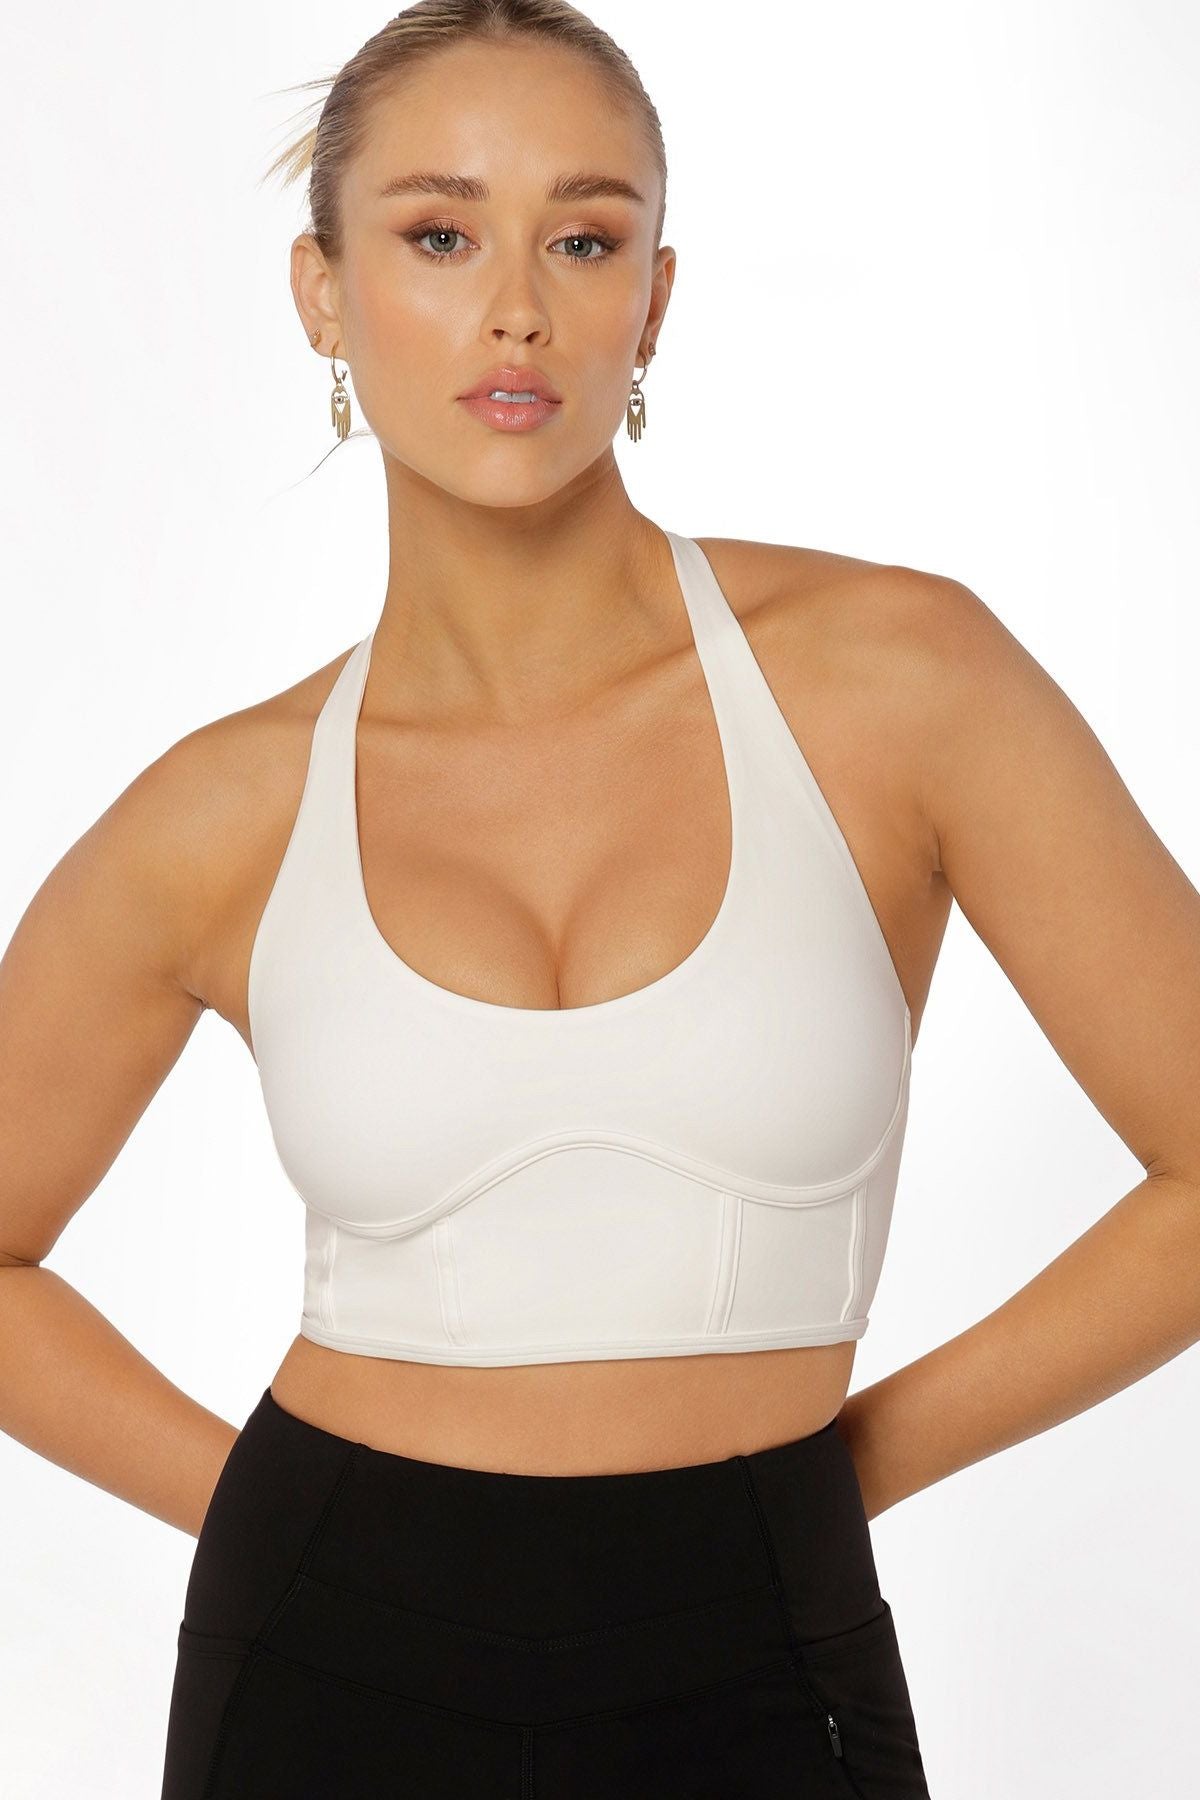 Lorna Jane Topspin All Day Support Sports Bra-Porcelain - Tops